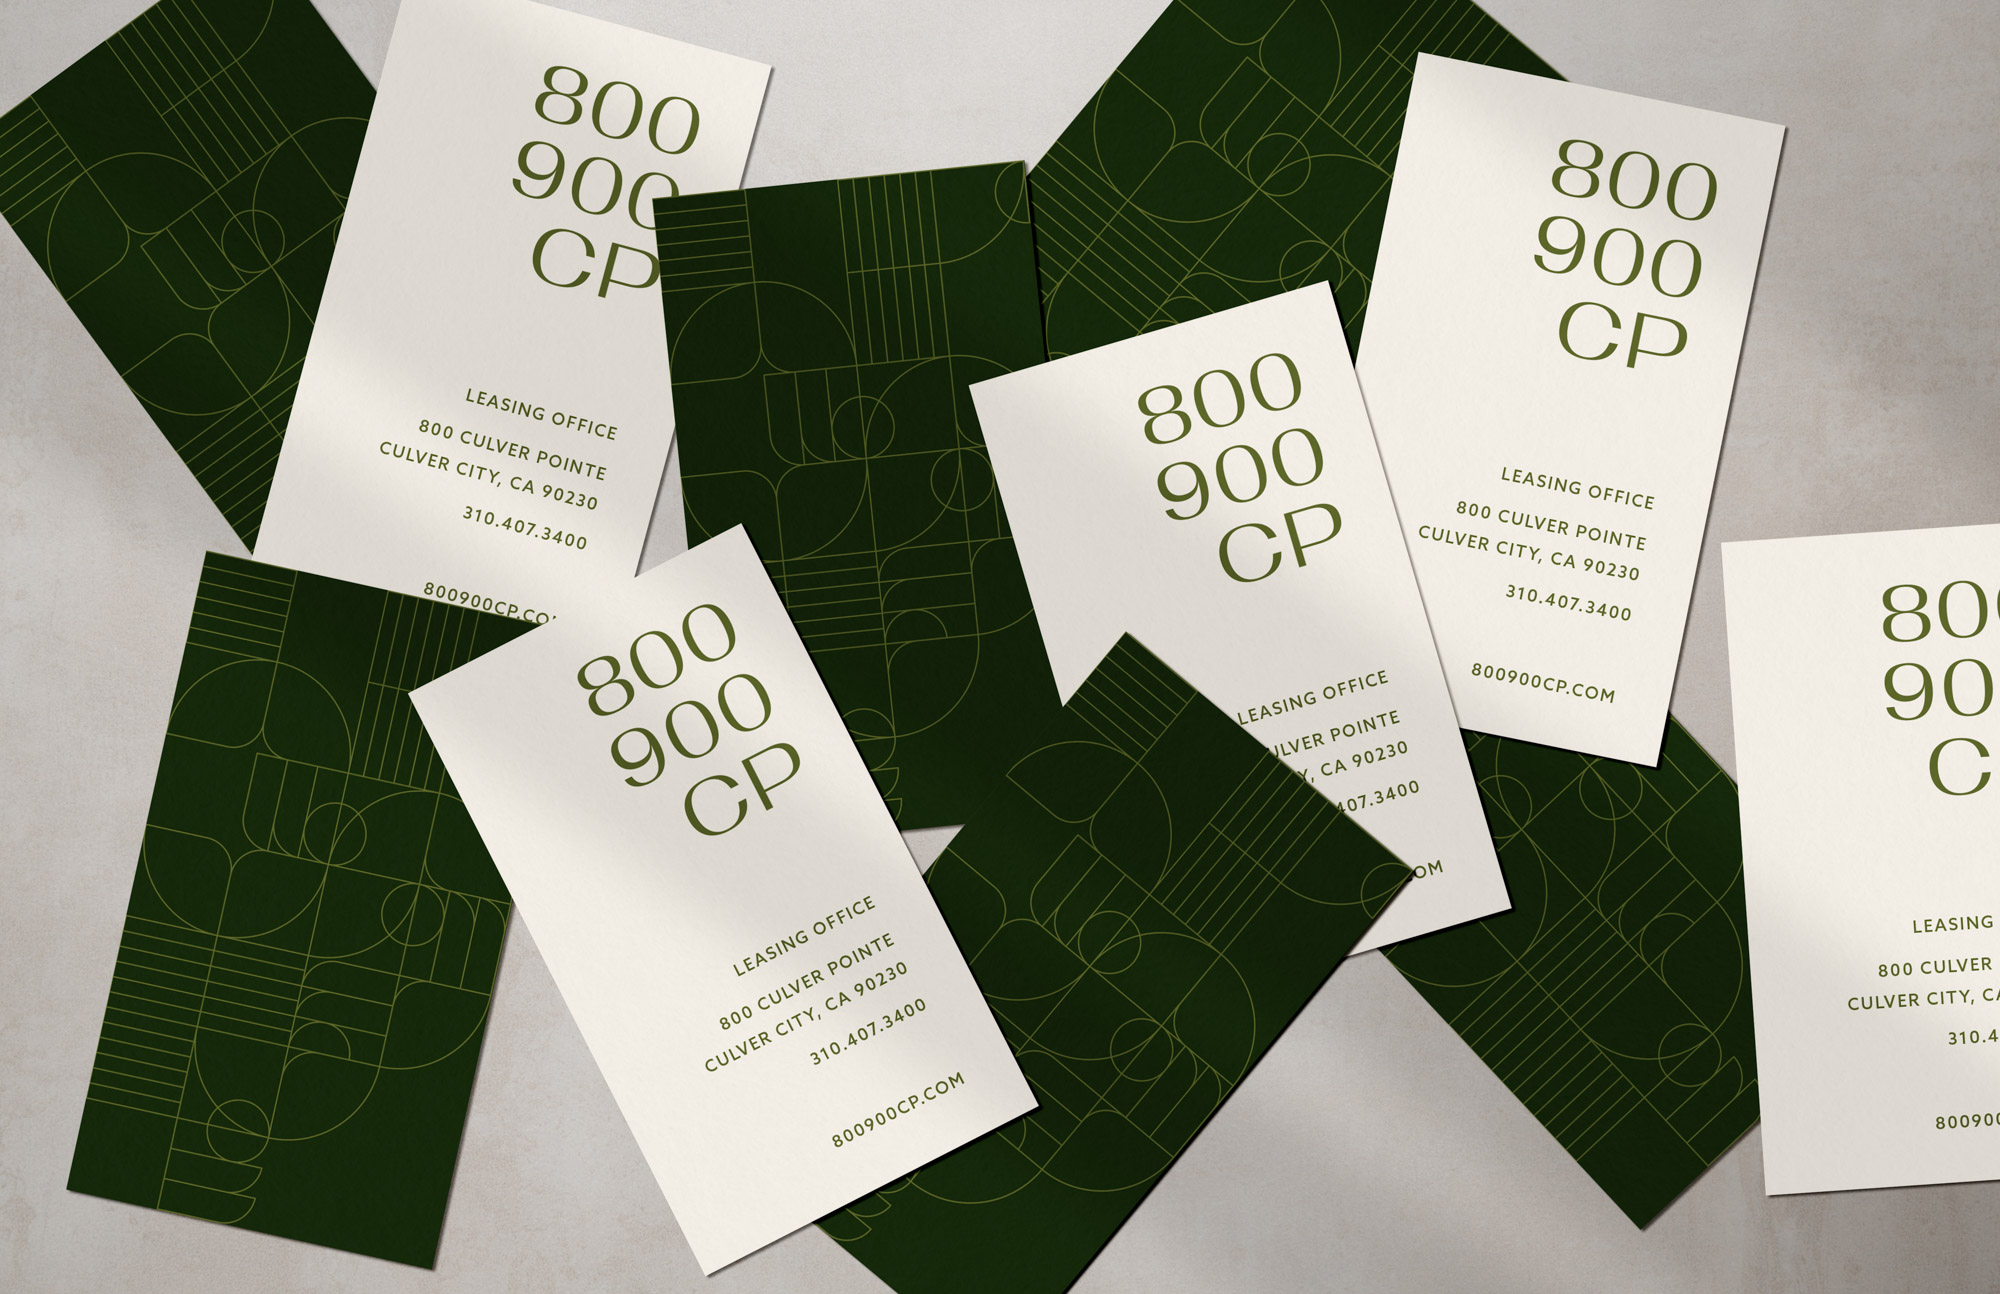 800 900 CP business cards with green pattern on back and contact information on the front